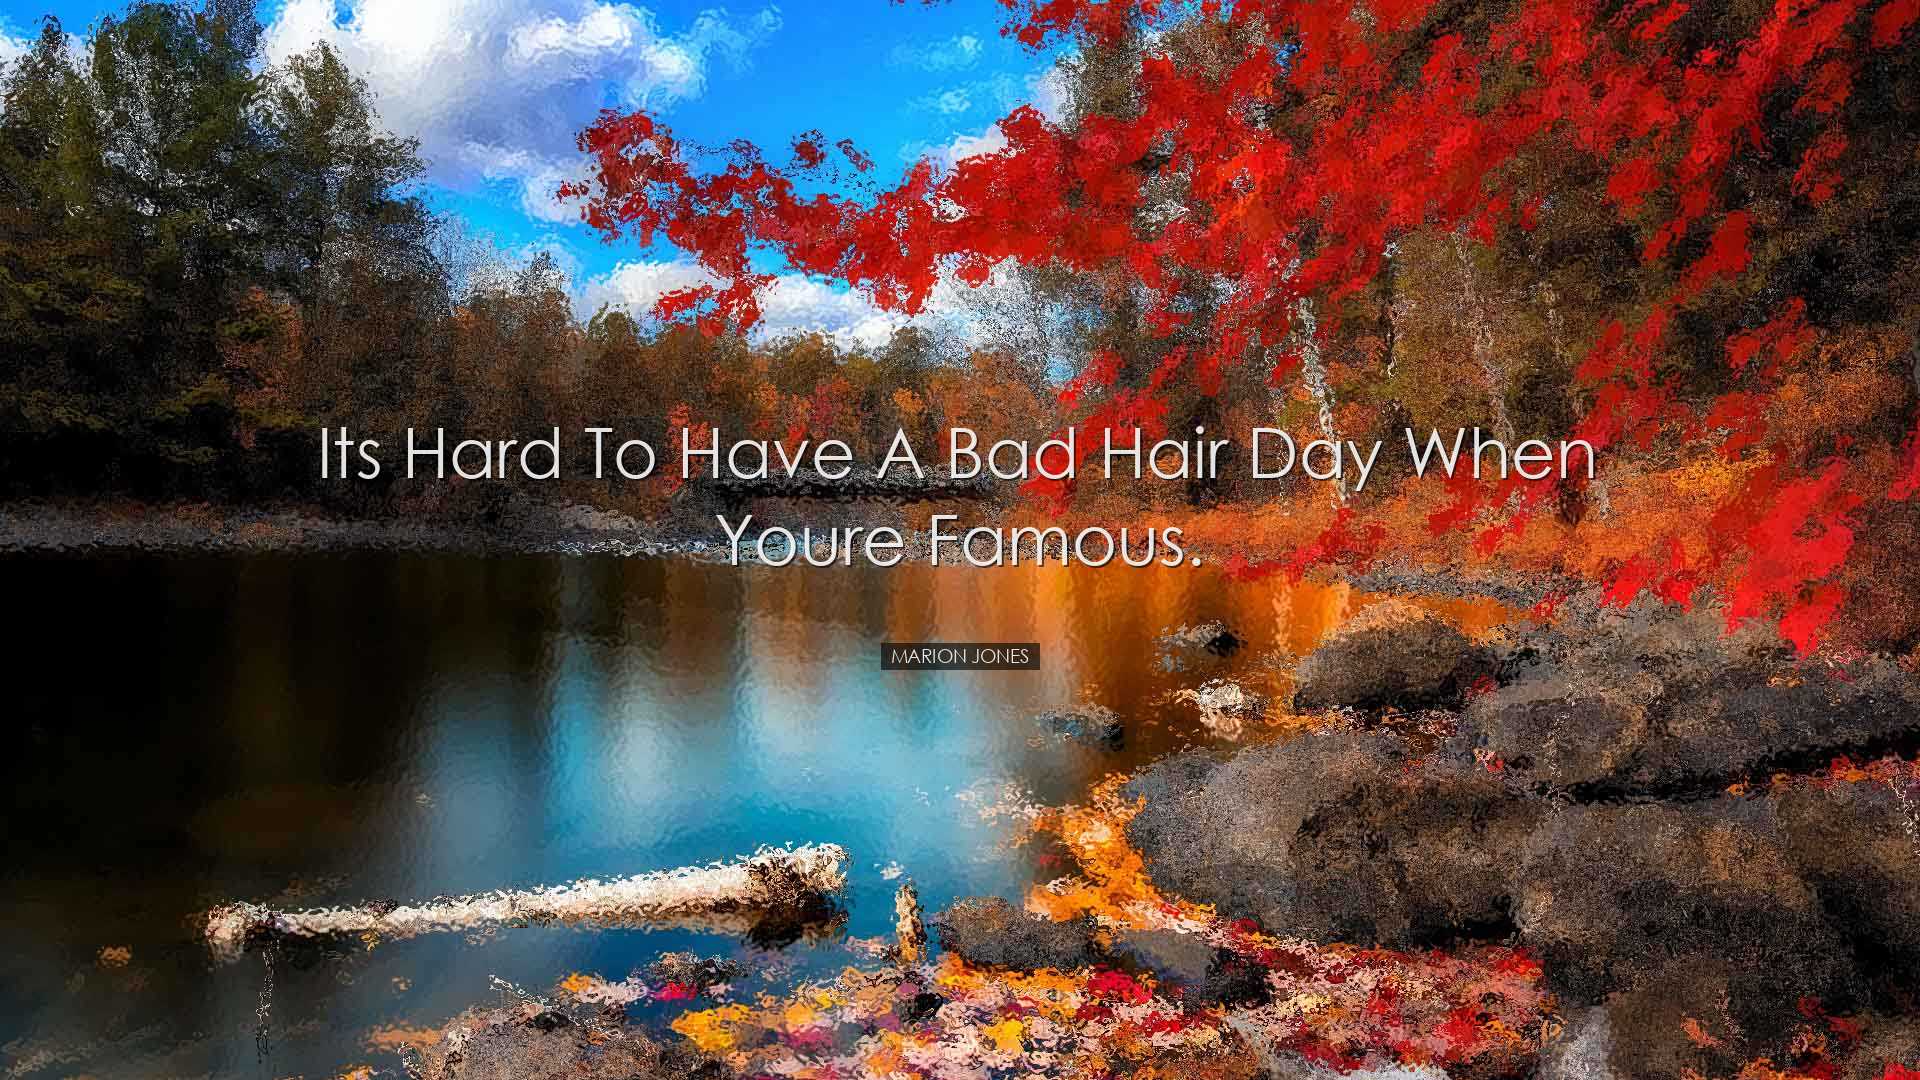 Its hard to have a bad hair day when youre famous. - Marion Jones